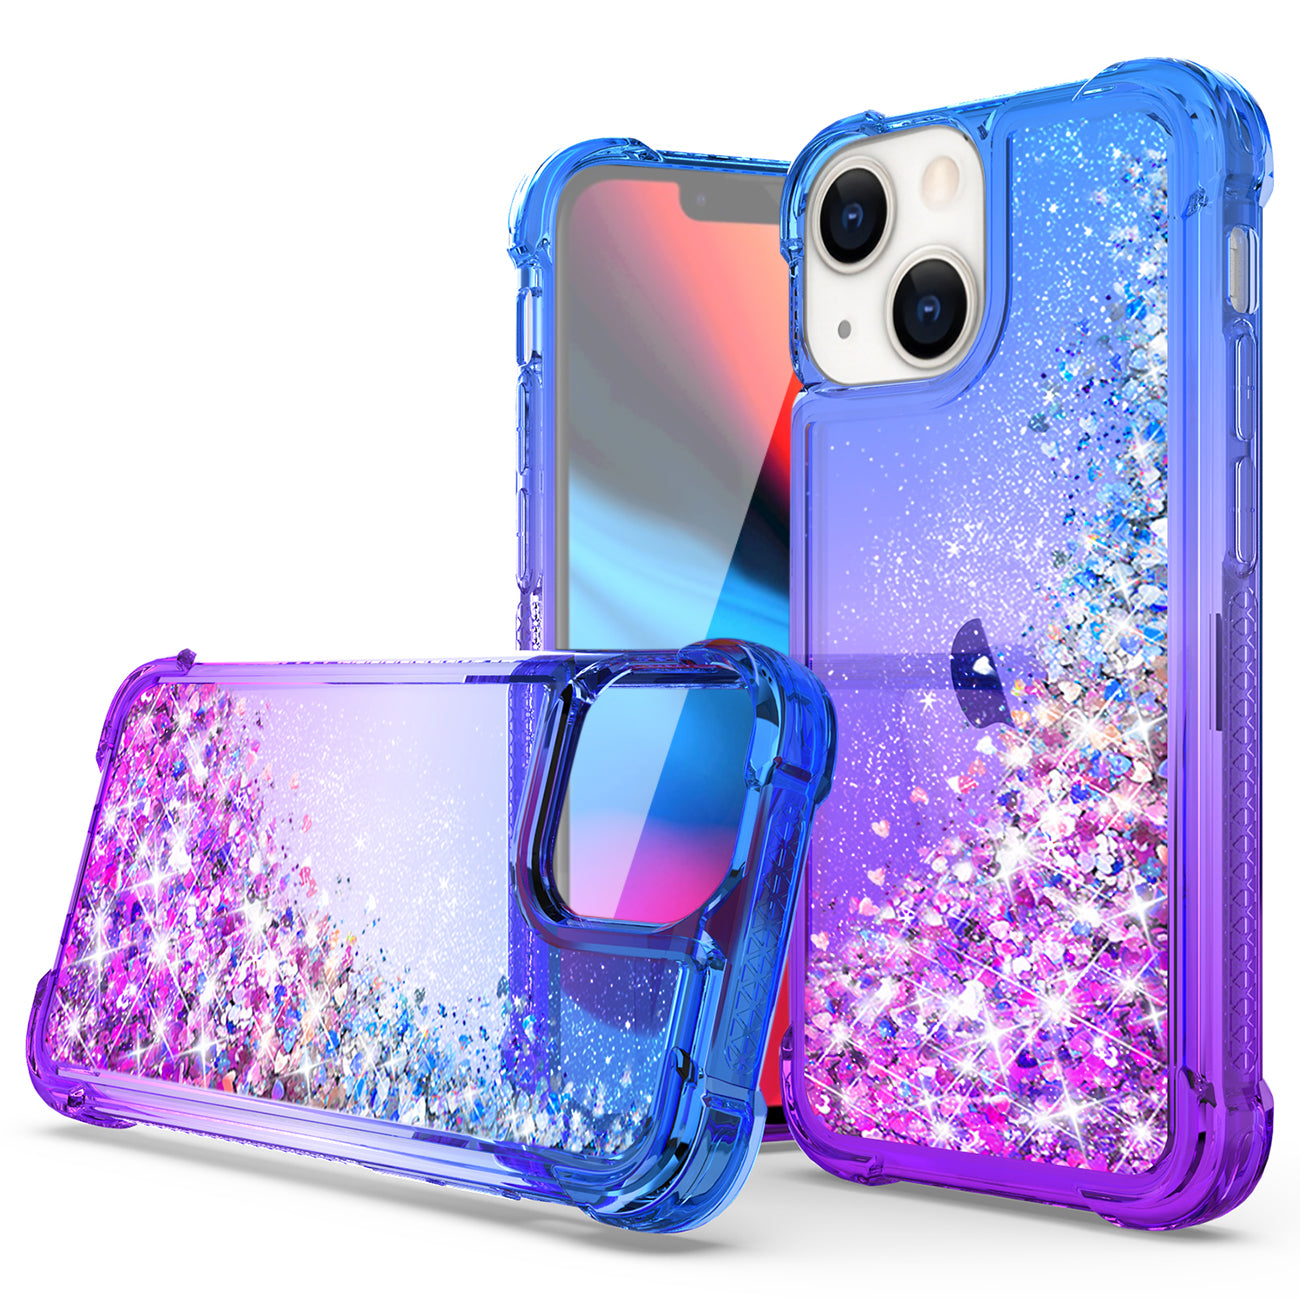 Shiny Flowing Glitter Liquid Bumper Case For APPLE IPHONE 13 In Blue